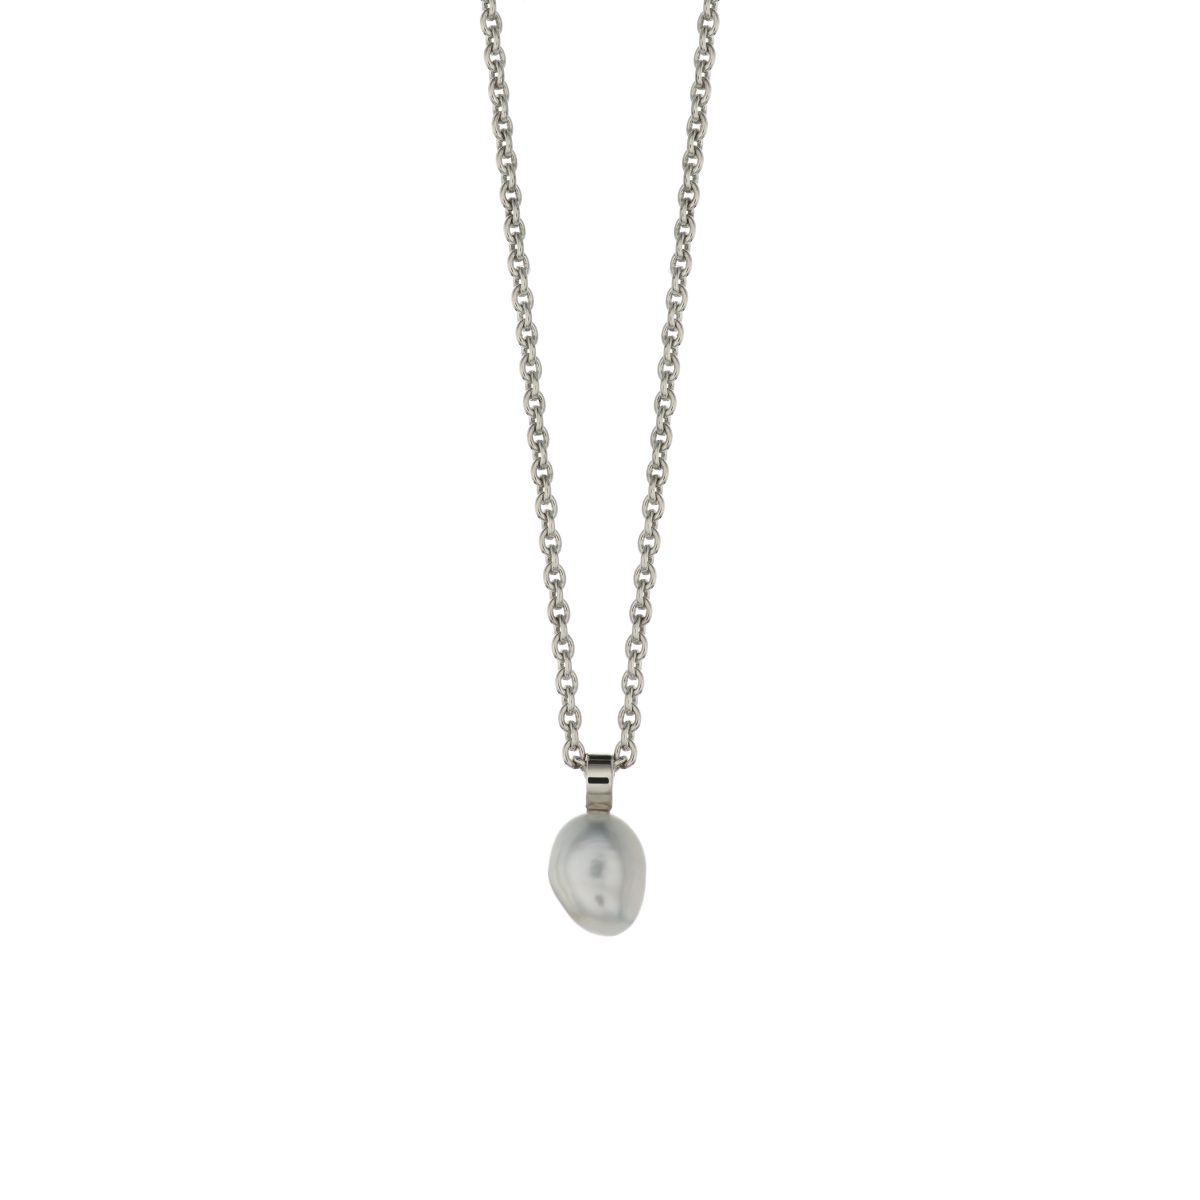 SOUTH SEA KESHI PEARL NECKLACE – SILVER